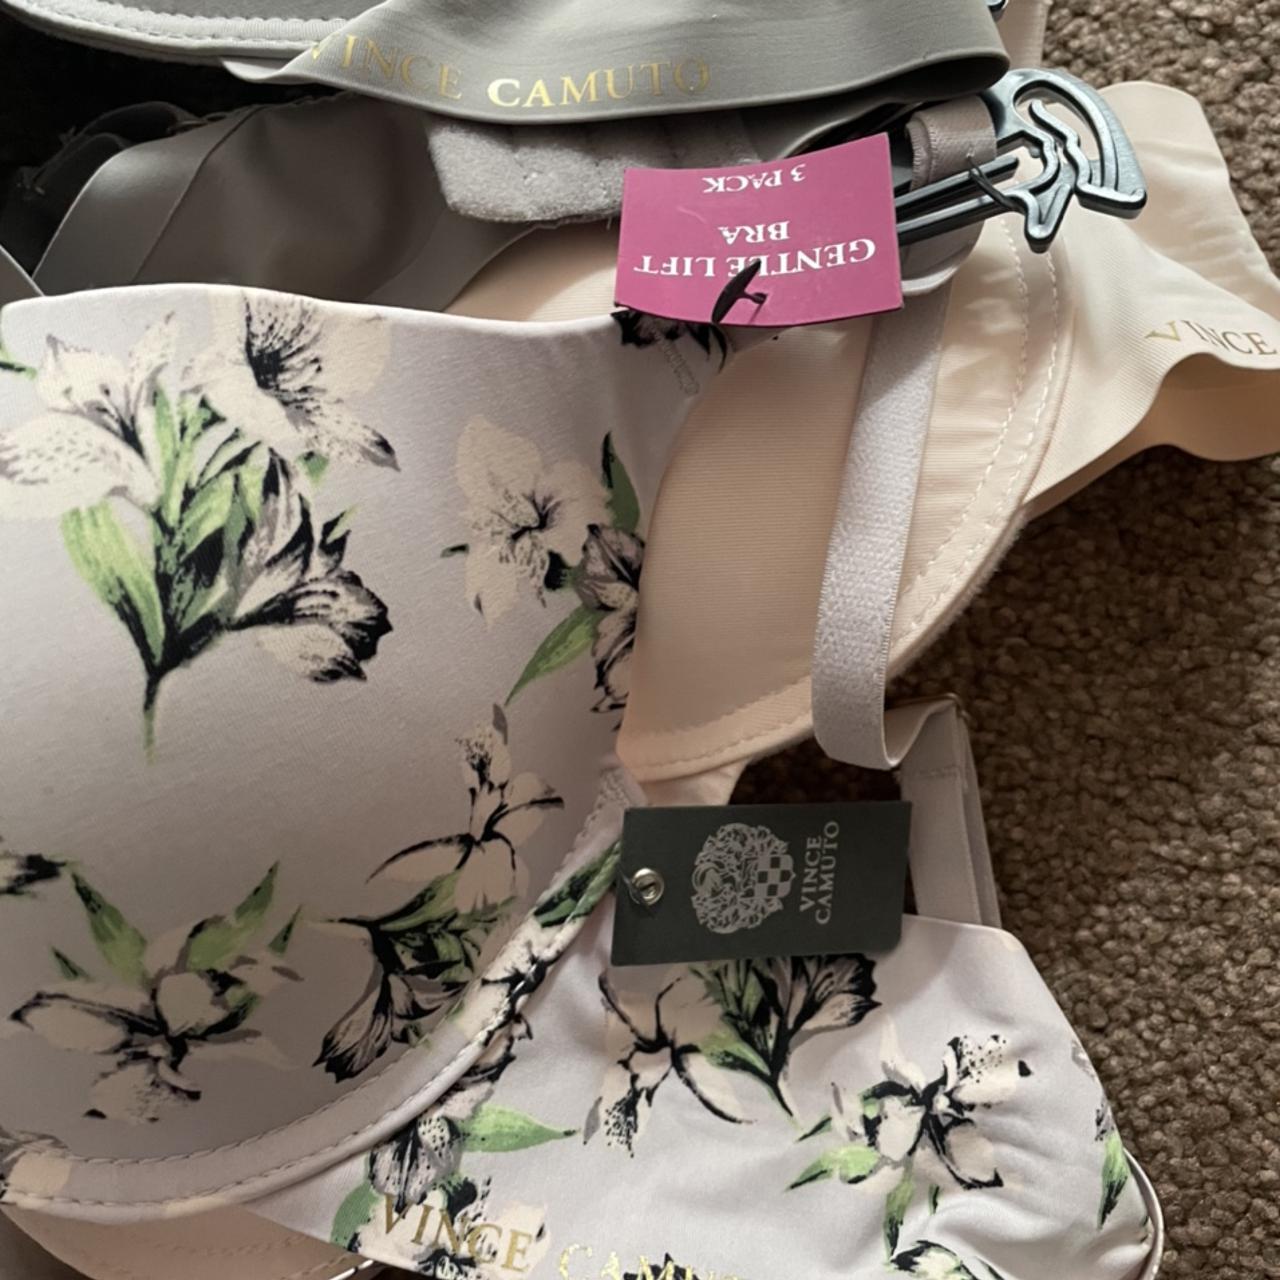 Vince camuto 3 pack bra set, brand new with tags.